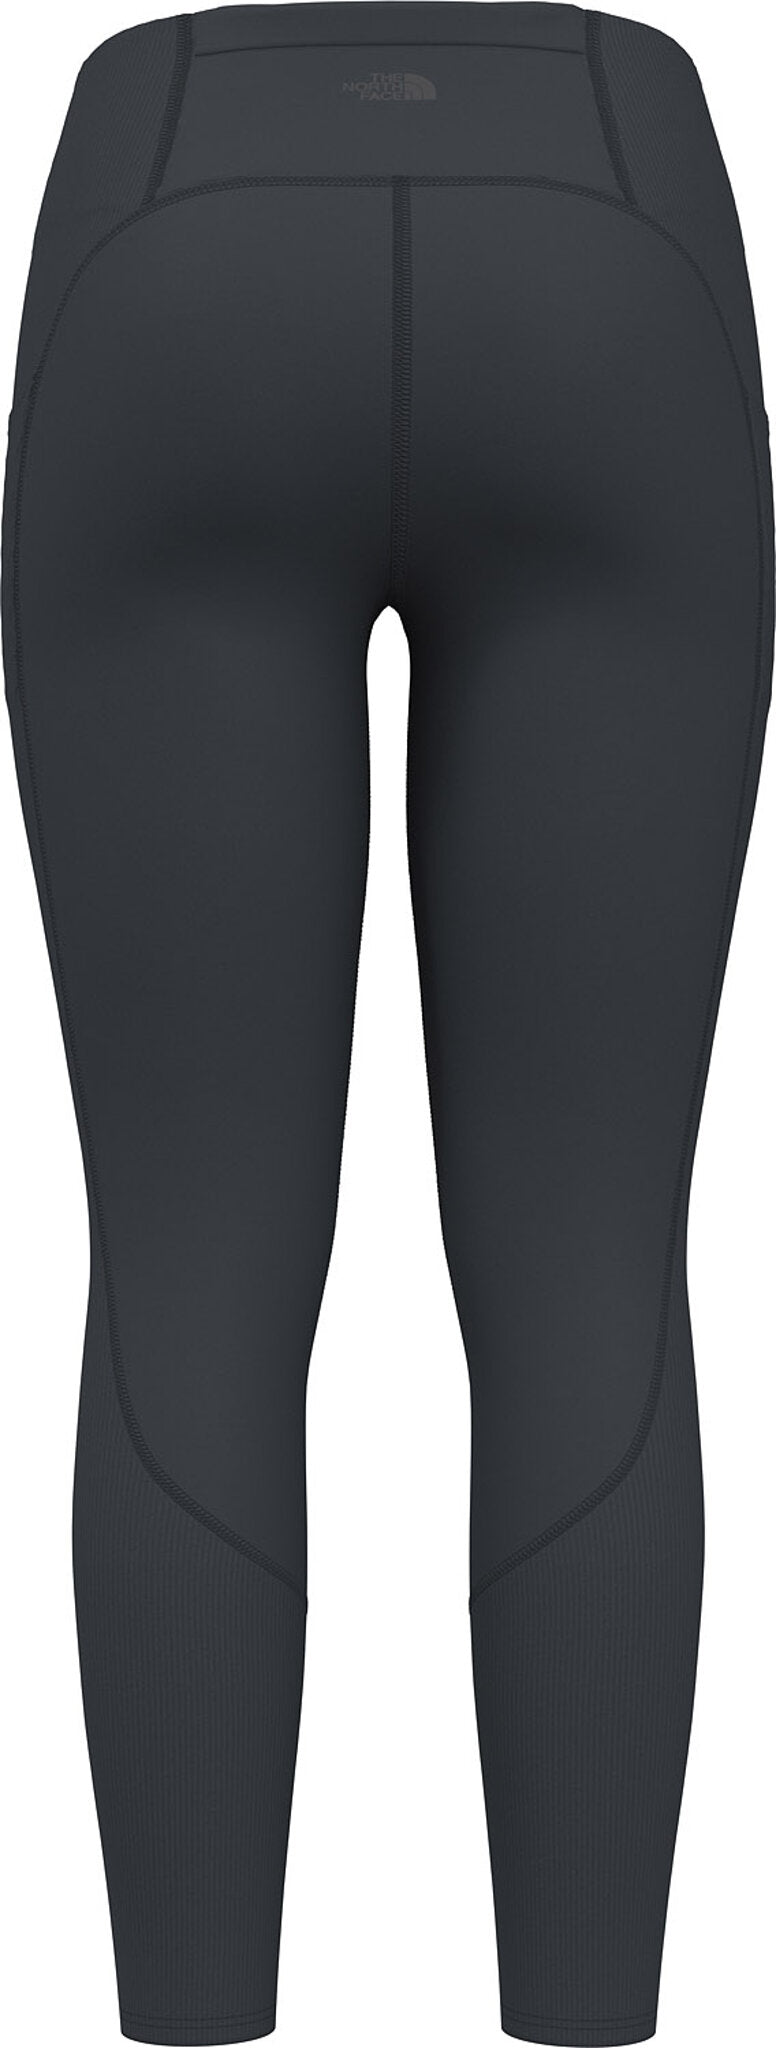 THE NORTH FACE Dune Sky 7/8 Tight - Women's TNF Black Small Regular at   Women's Clothing store